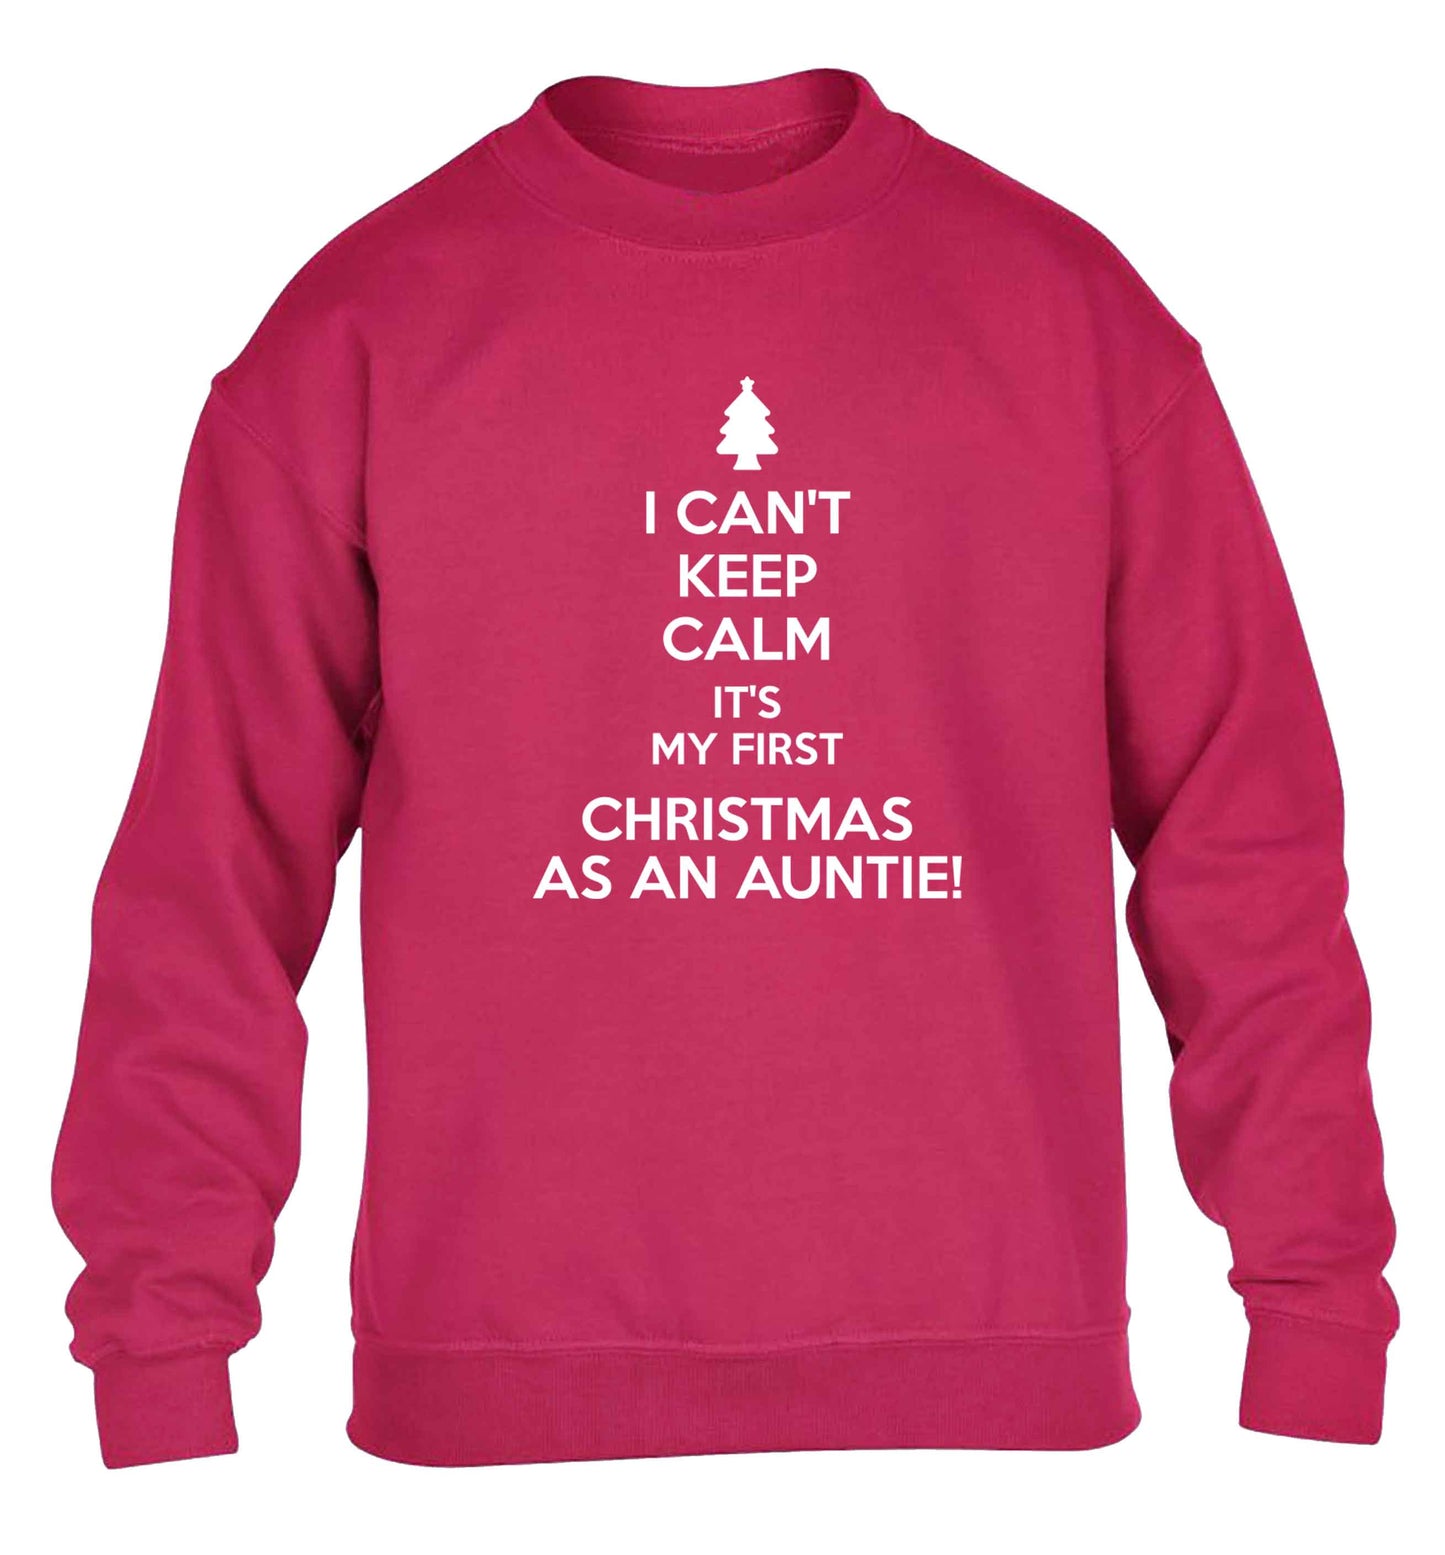 I can't keep calm it's my first Christmas as an auntie! children's pink sweater 12-13 Years